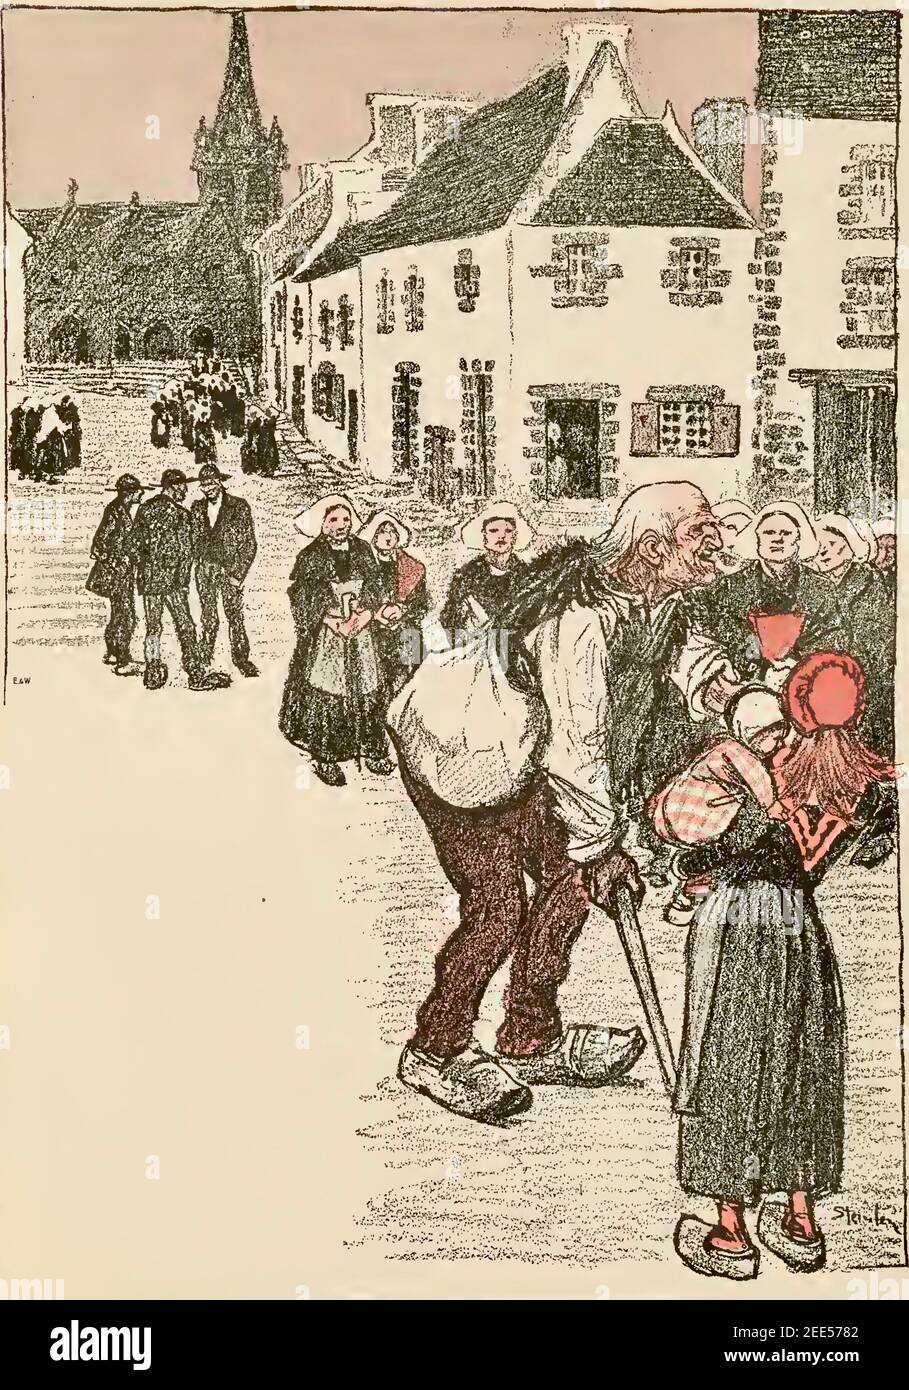 Vintage artwork by Theophile Steinlen entitled Le Vieux or The Old Man. An elderly gentleman interacts with the towns-folk in a northern french village. Stock Photo